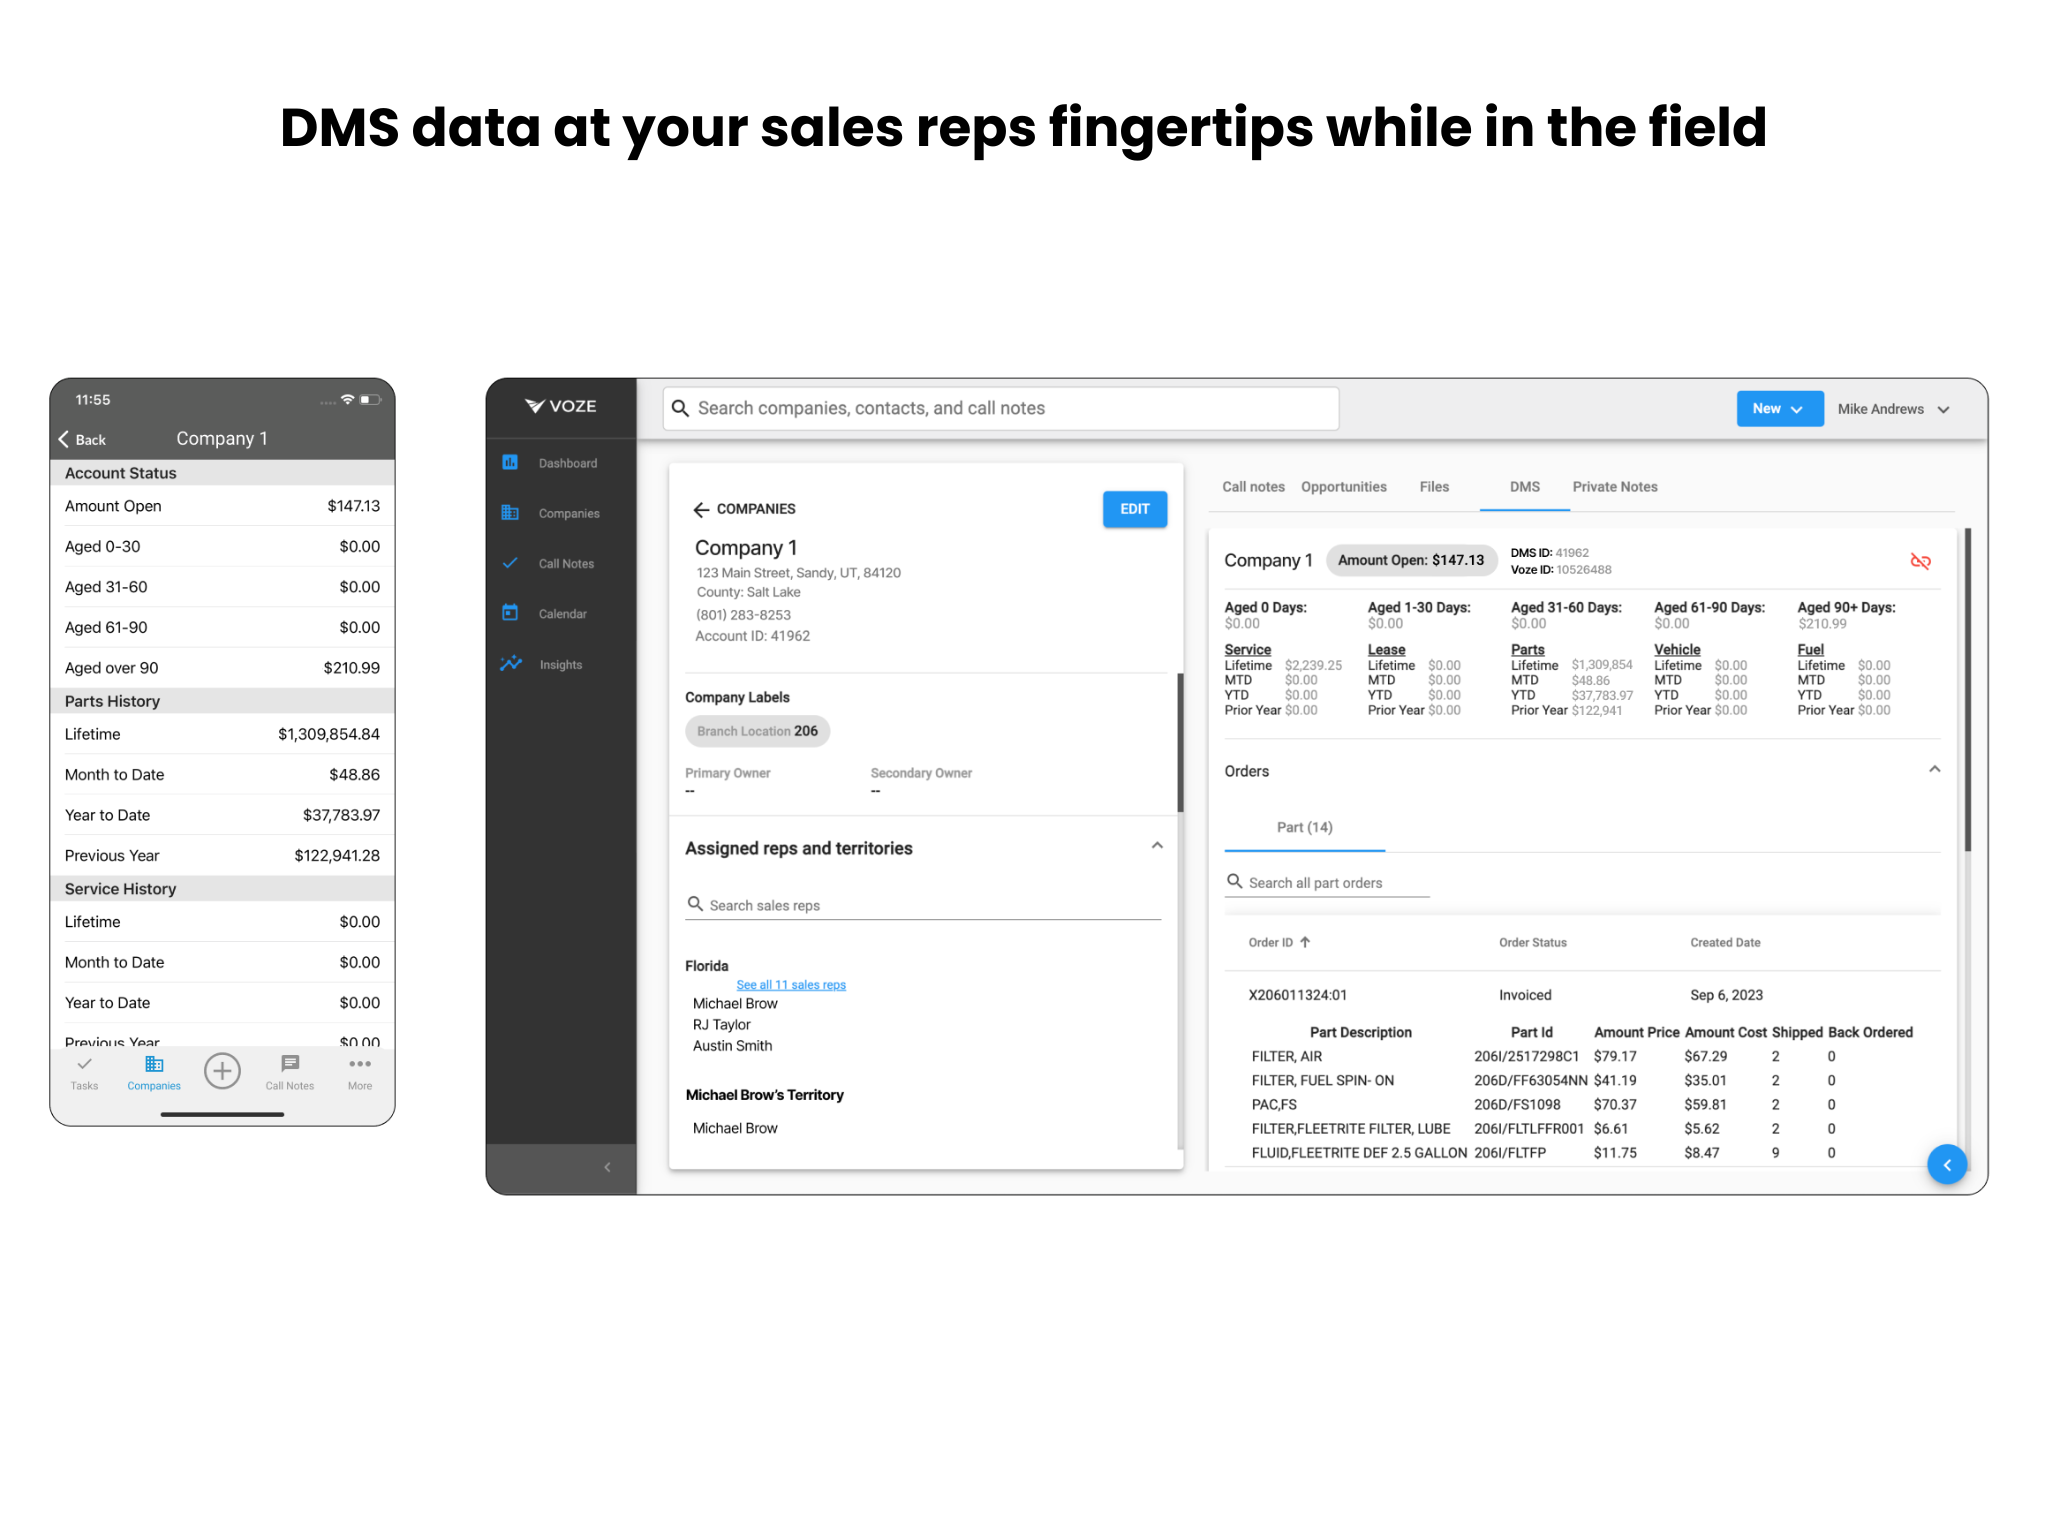 We've partnered with Karmak and Procede to provide DMS data on mobile to your reps in the field. Have access to historical sales data by account at your fingertips.